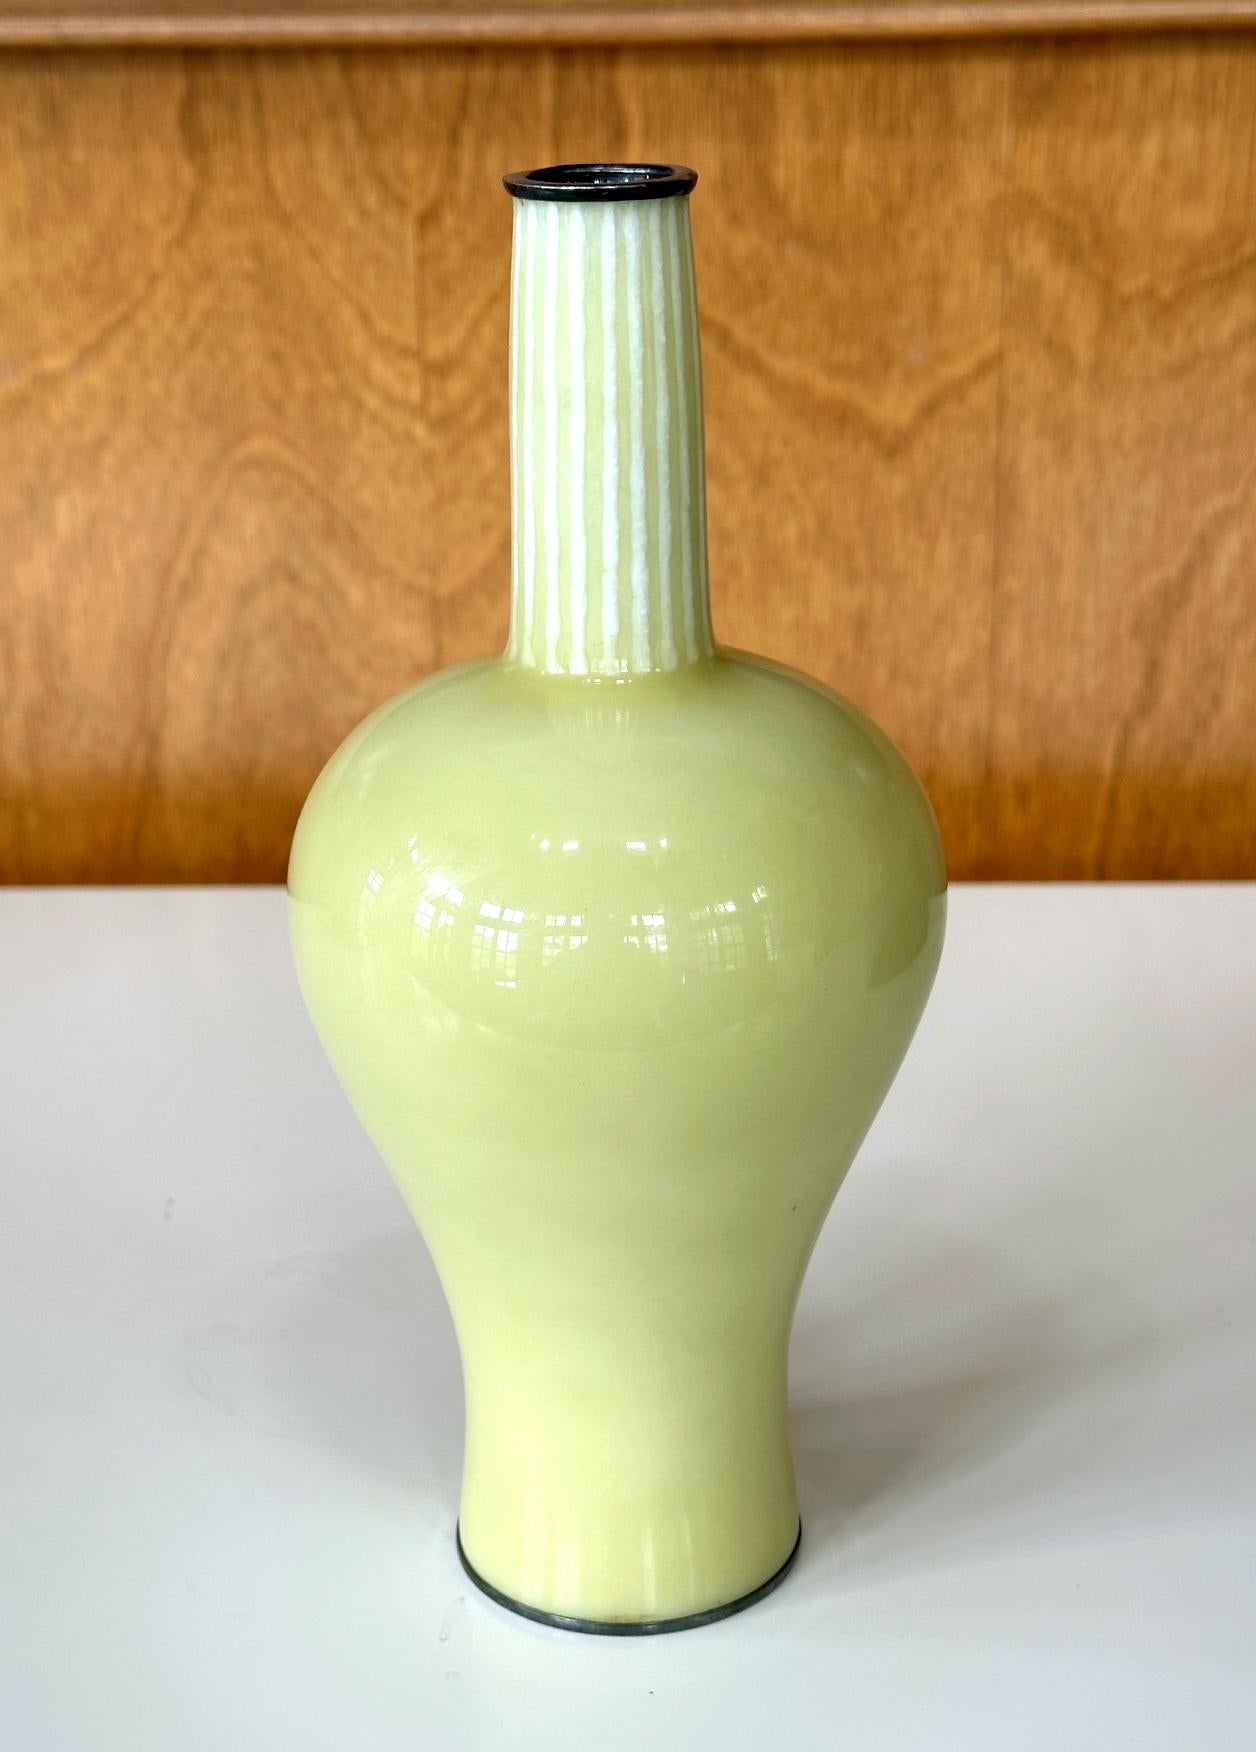 A Japanese cloisonne vase in bottle-form made by Ando Jubei (1876-1963) circa 1910-20s (late Meiji to Taisho period). The vase features a completely smooth surface without showing any wire. The technique is known as Musen (hidden wire) in Japanese